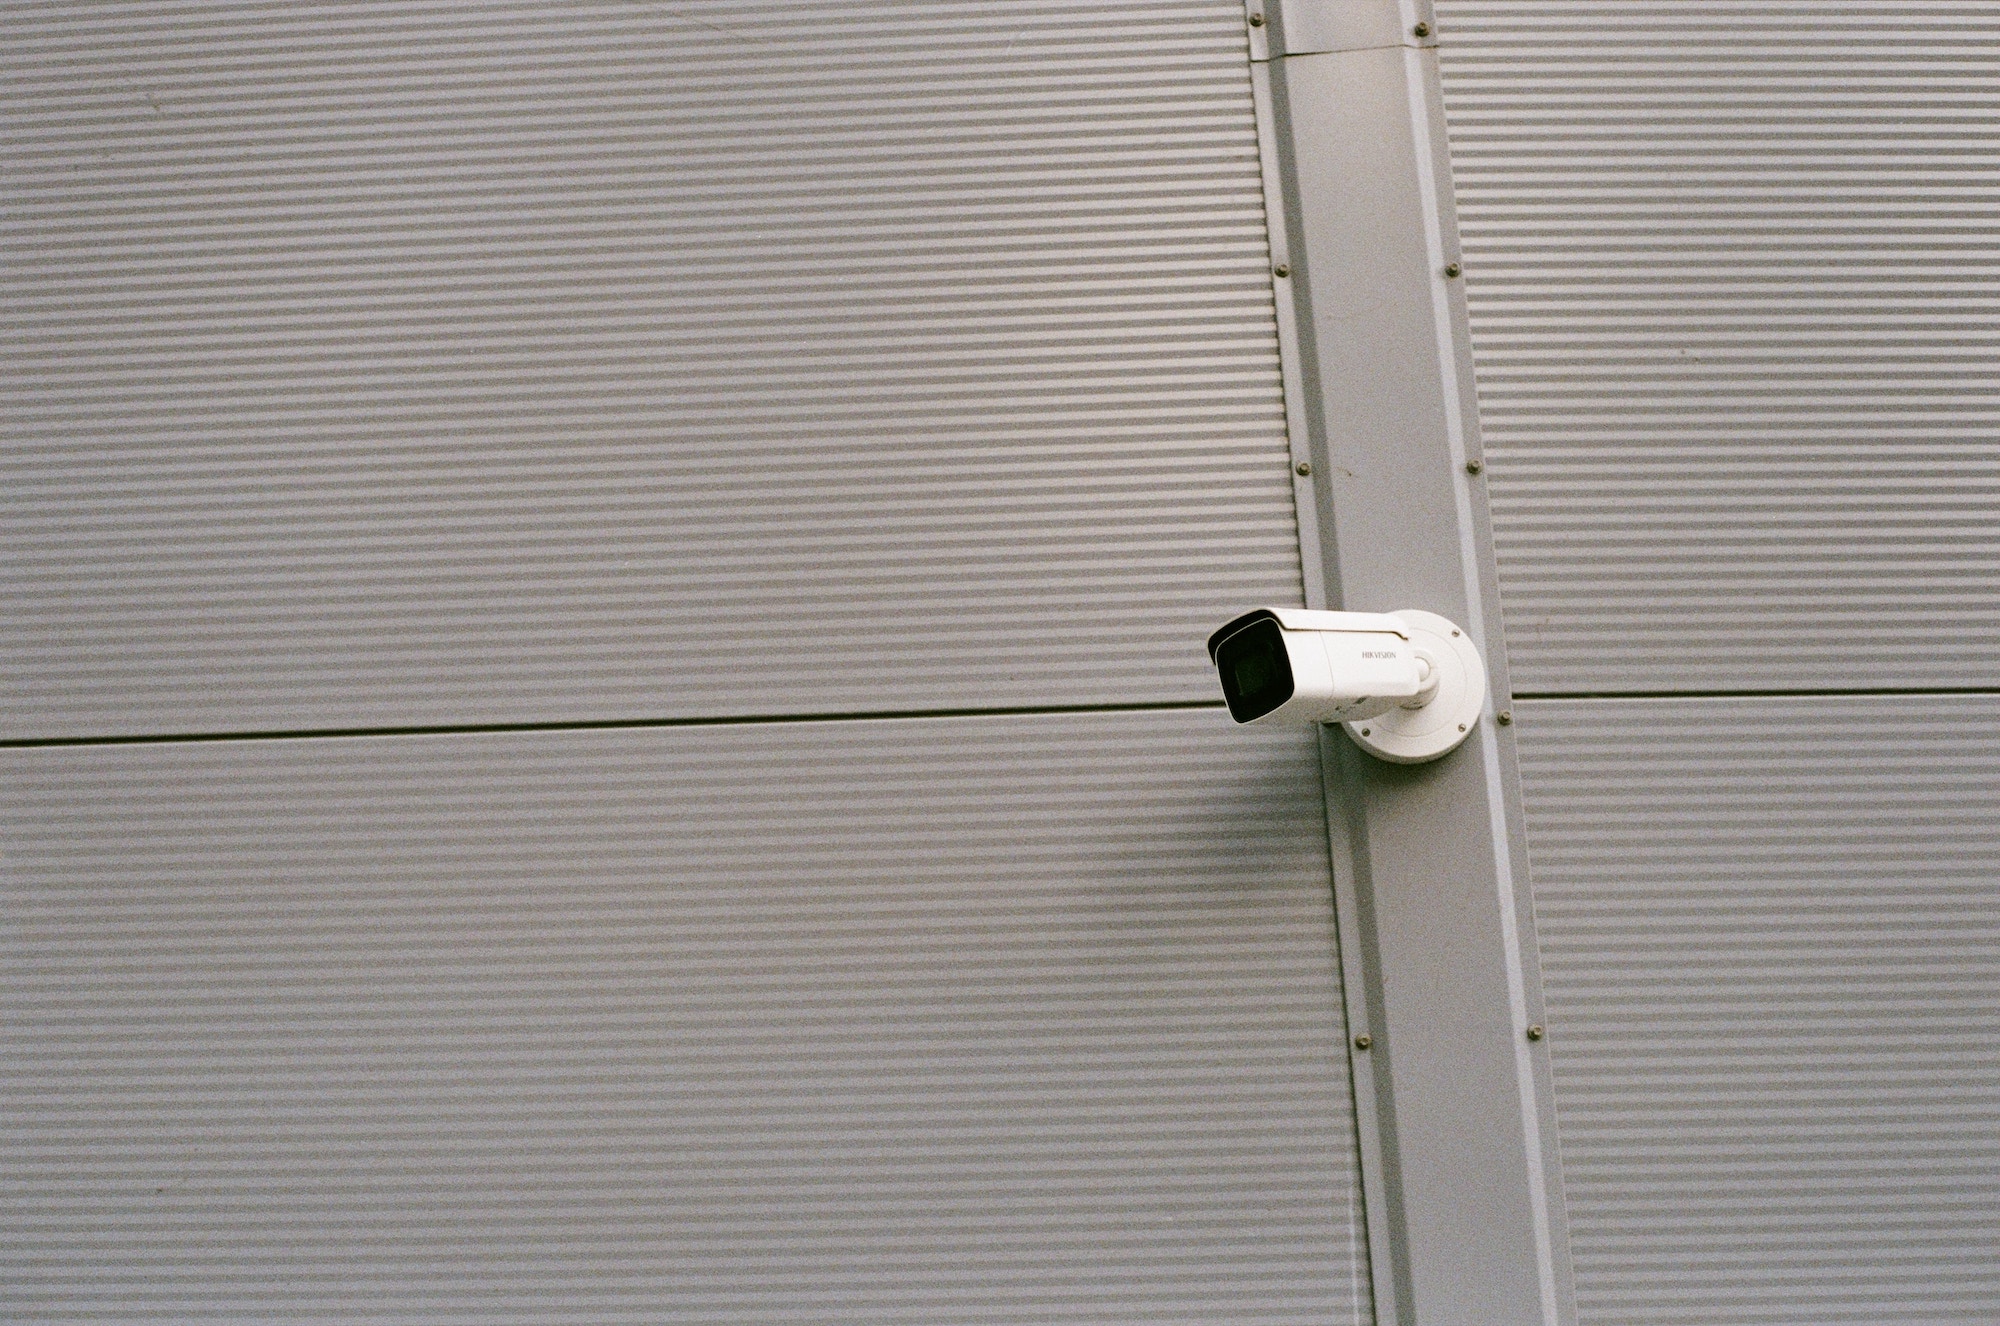 Macao day care centres video surveillance systems